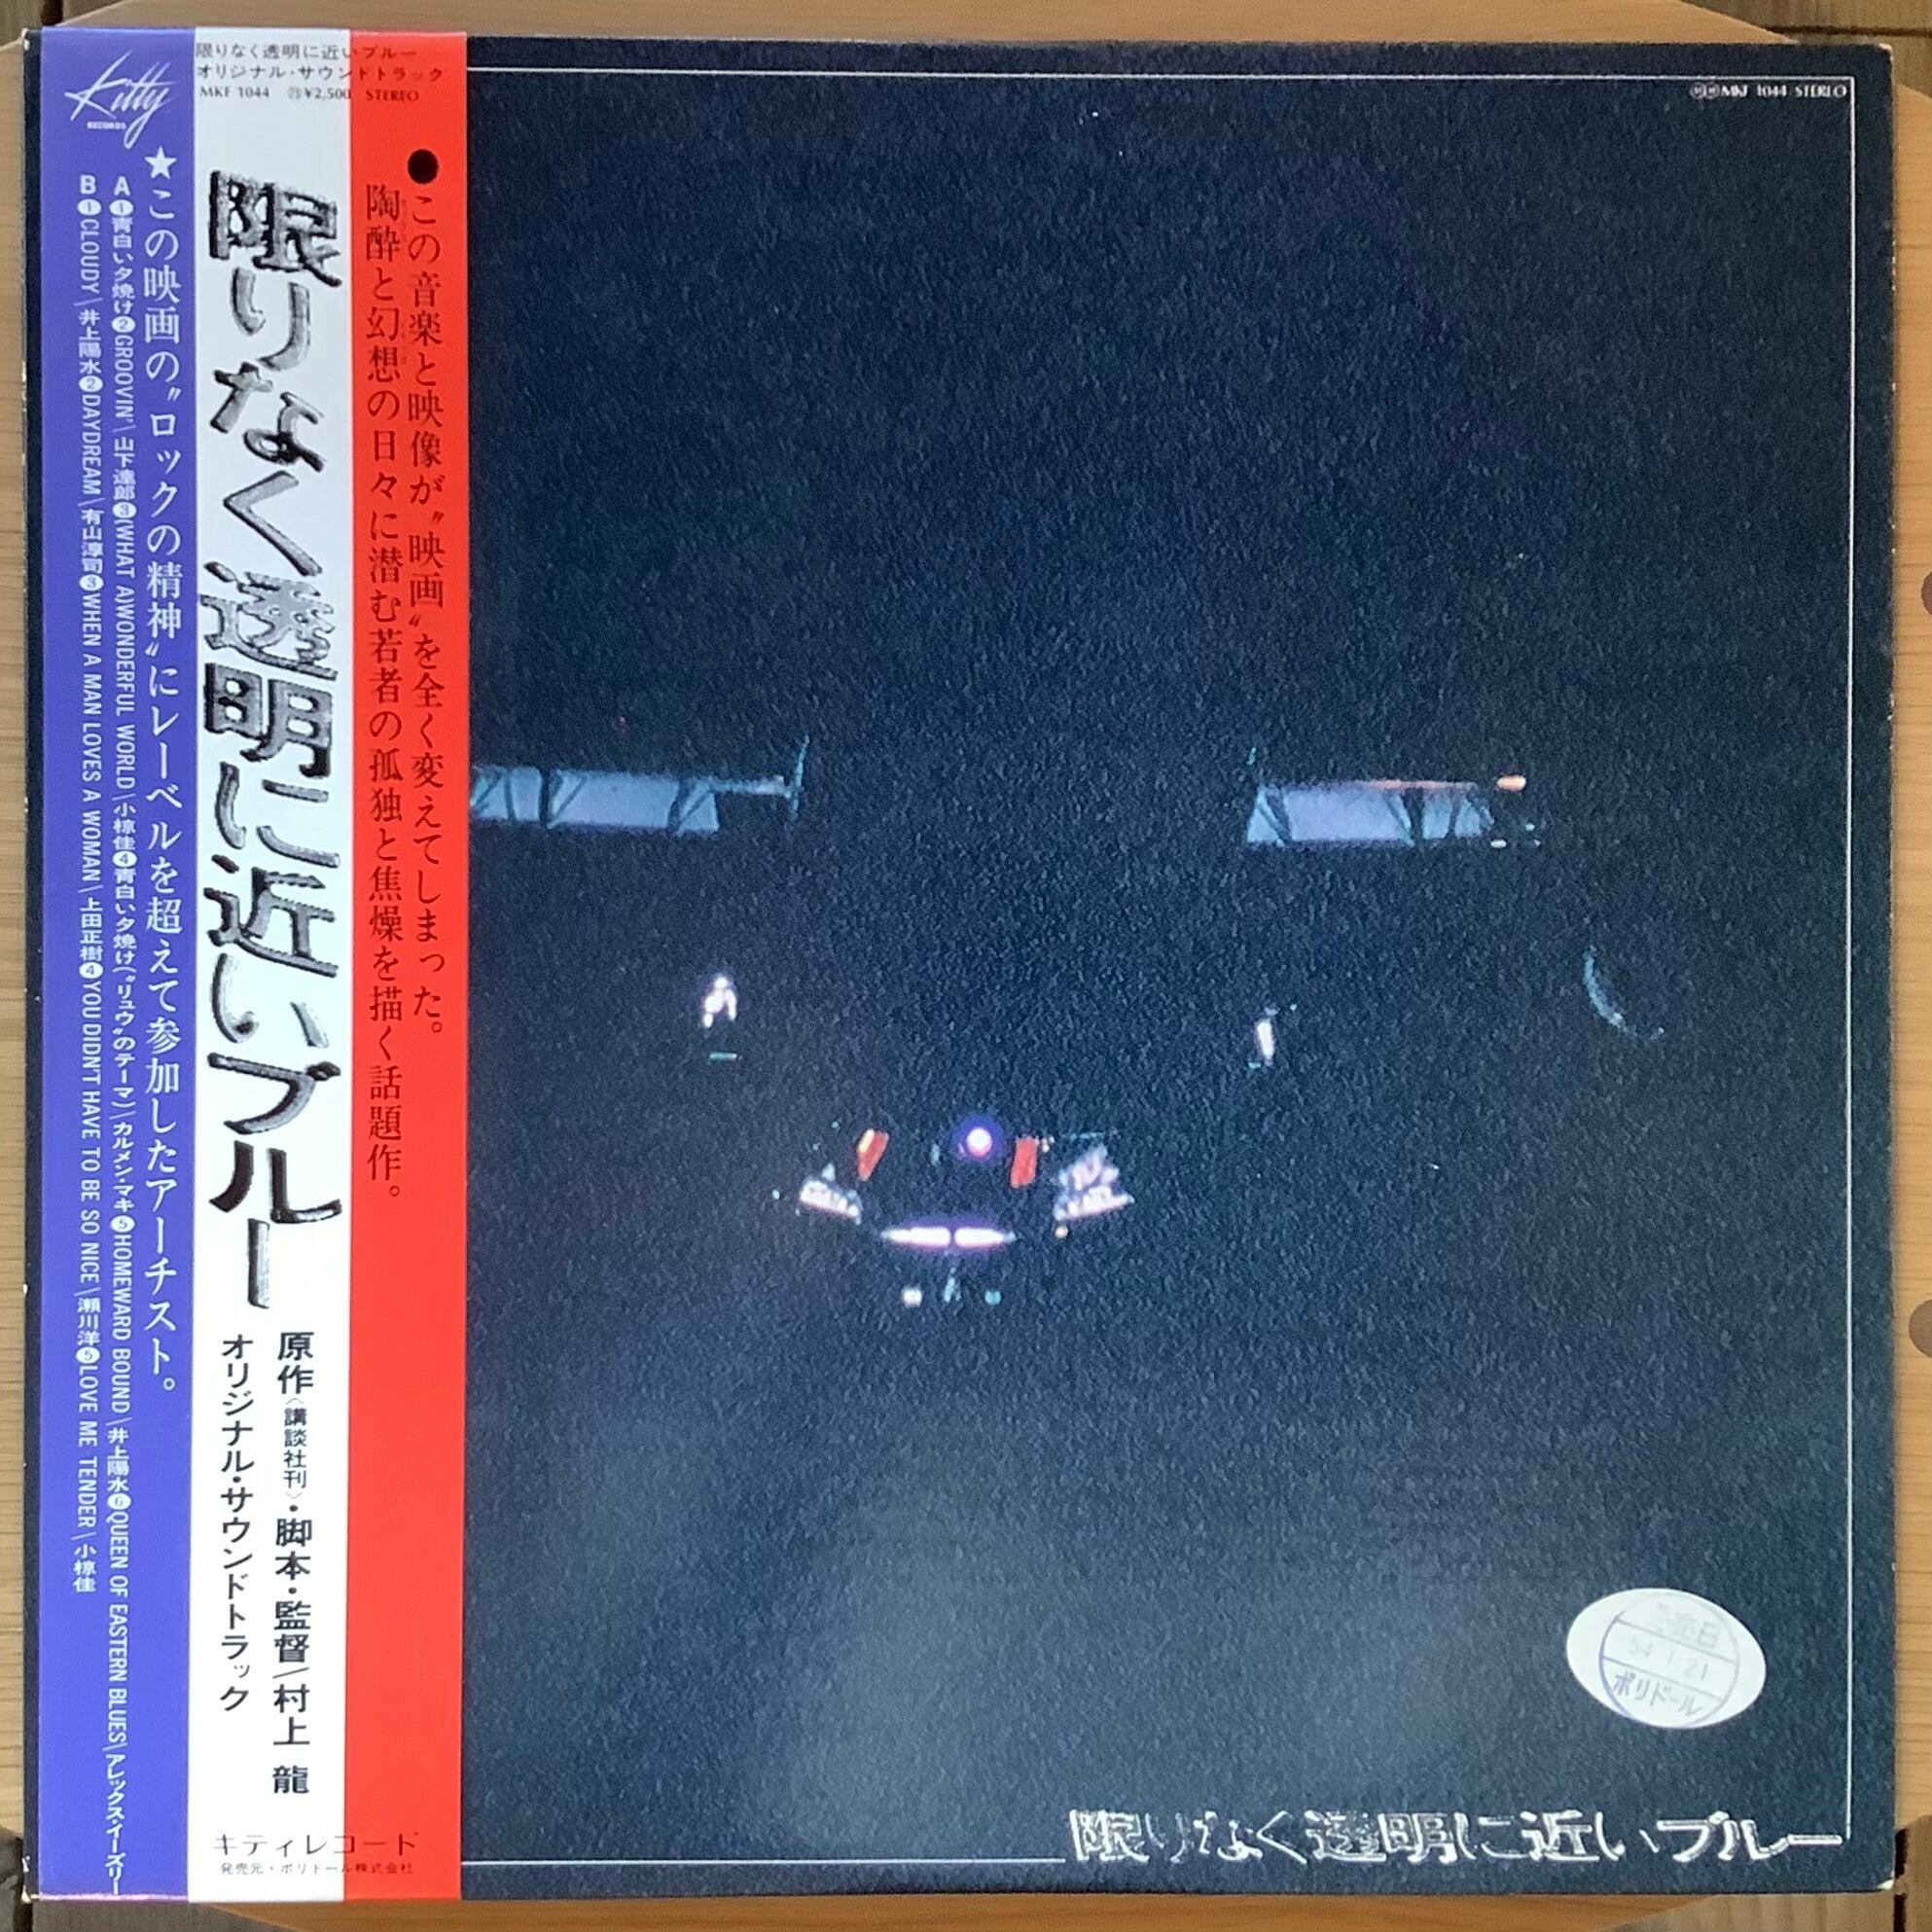 V.A. (VARIOUS ARTISTS) / O.S.T. / 限りなく透明に近いブルー | Plastic Soul Records  powered by BASE